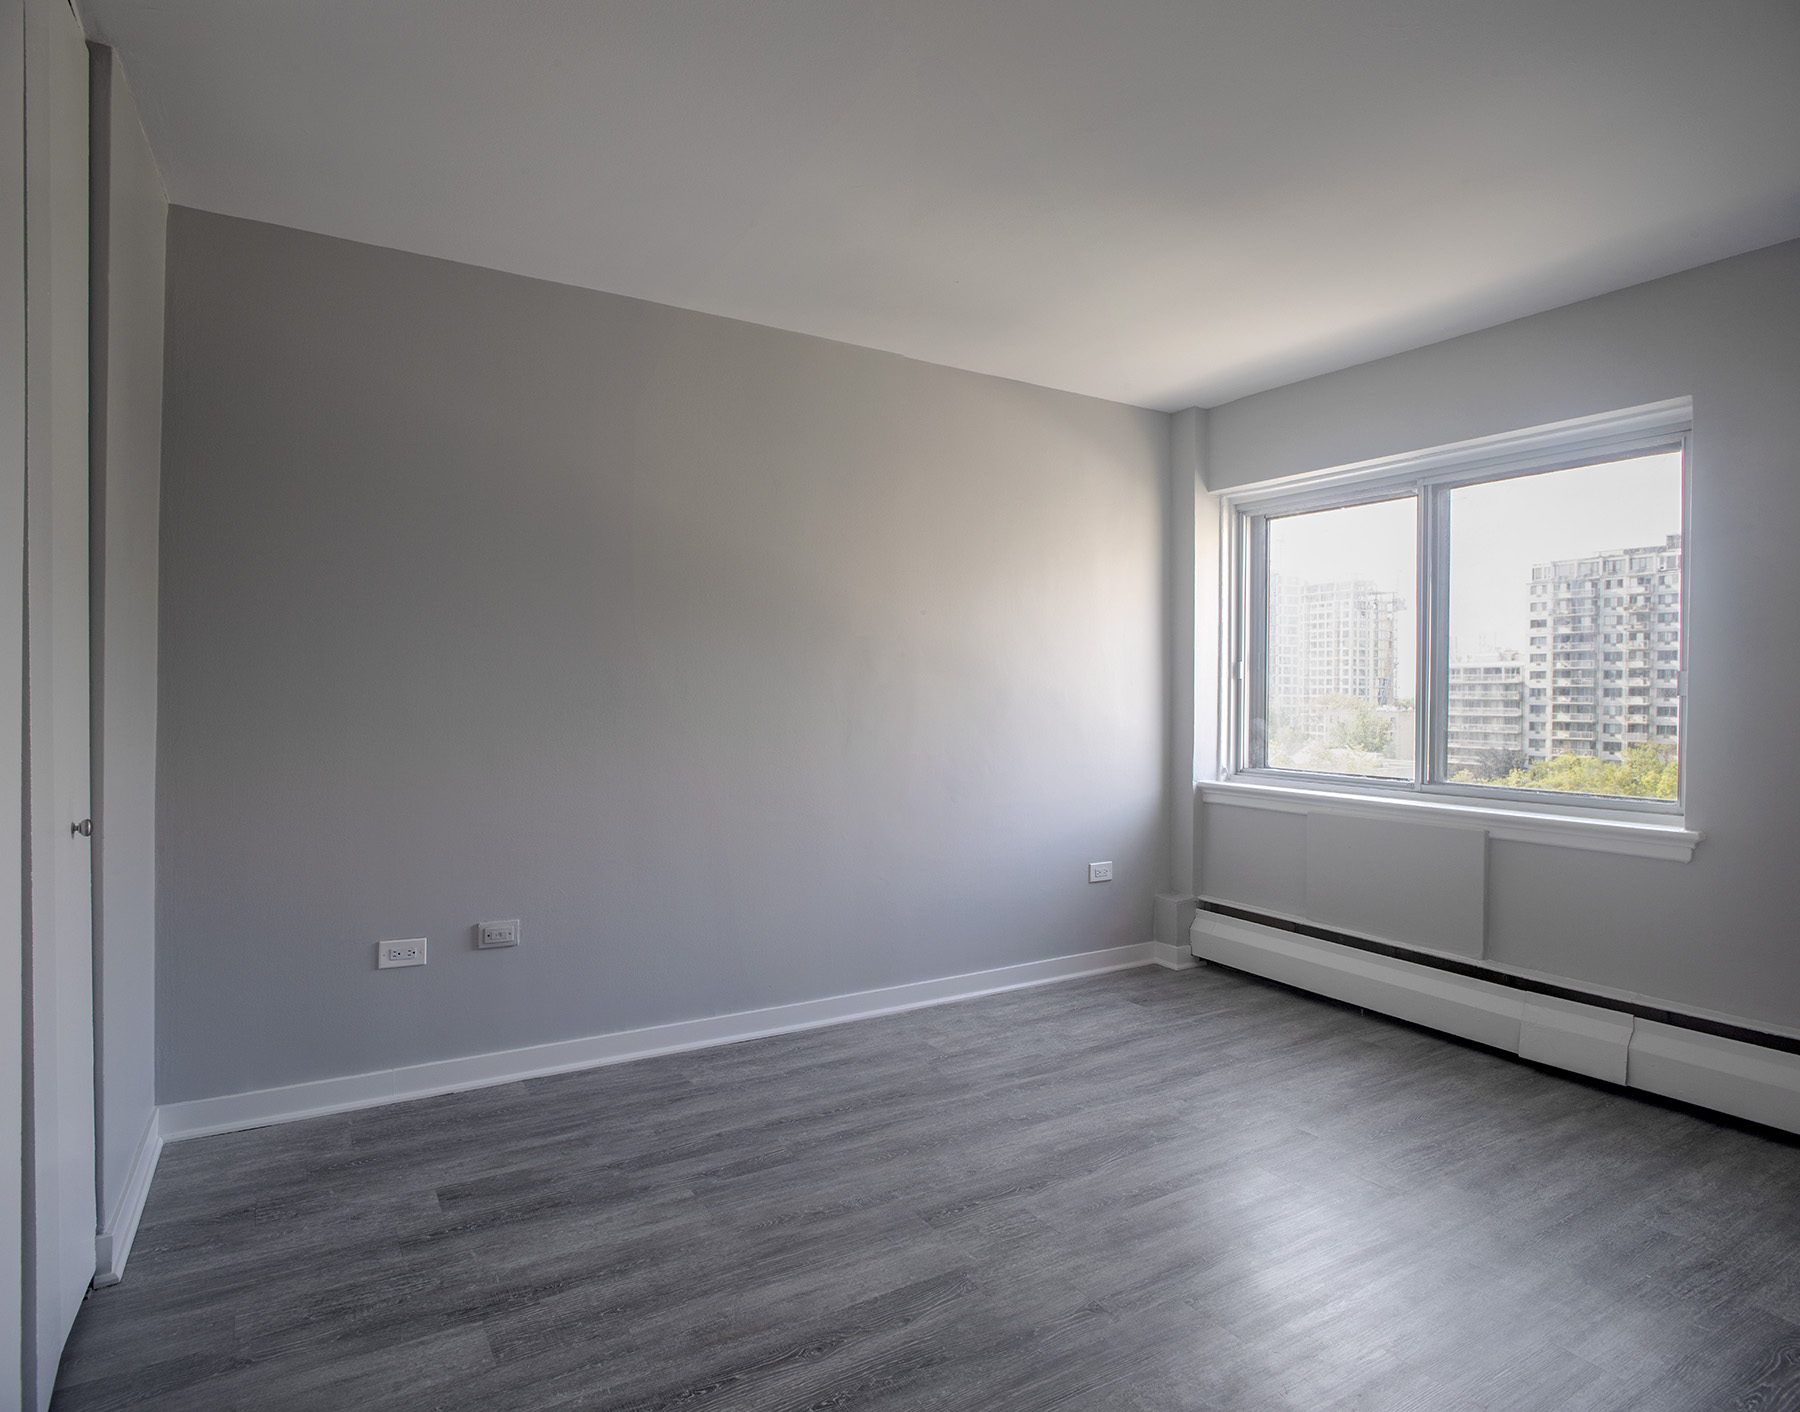 1 bedroom Apartments for rent in Montreal (Downtown) at Le Marco Appartements - Photo 07 - RentersPages – L401545